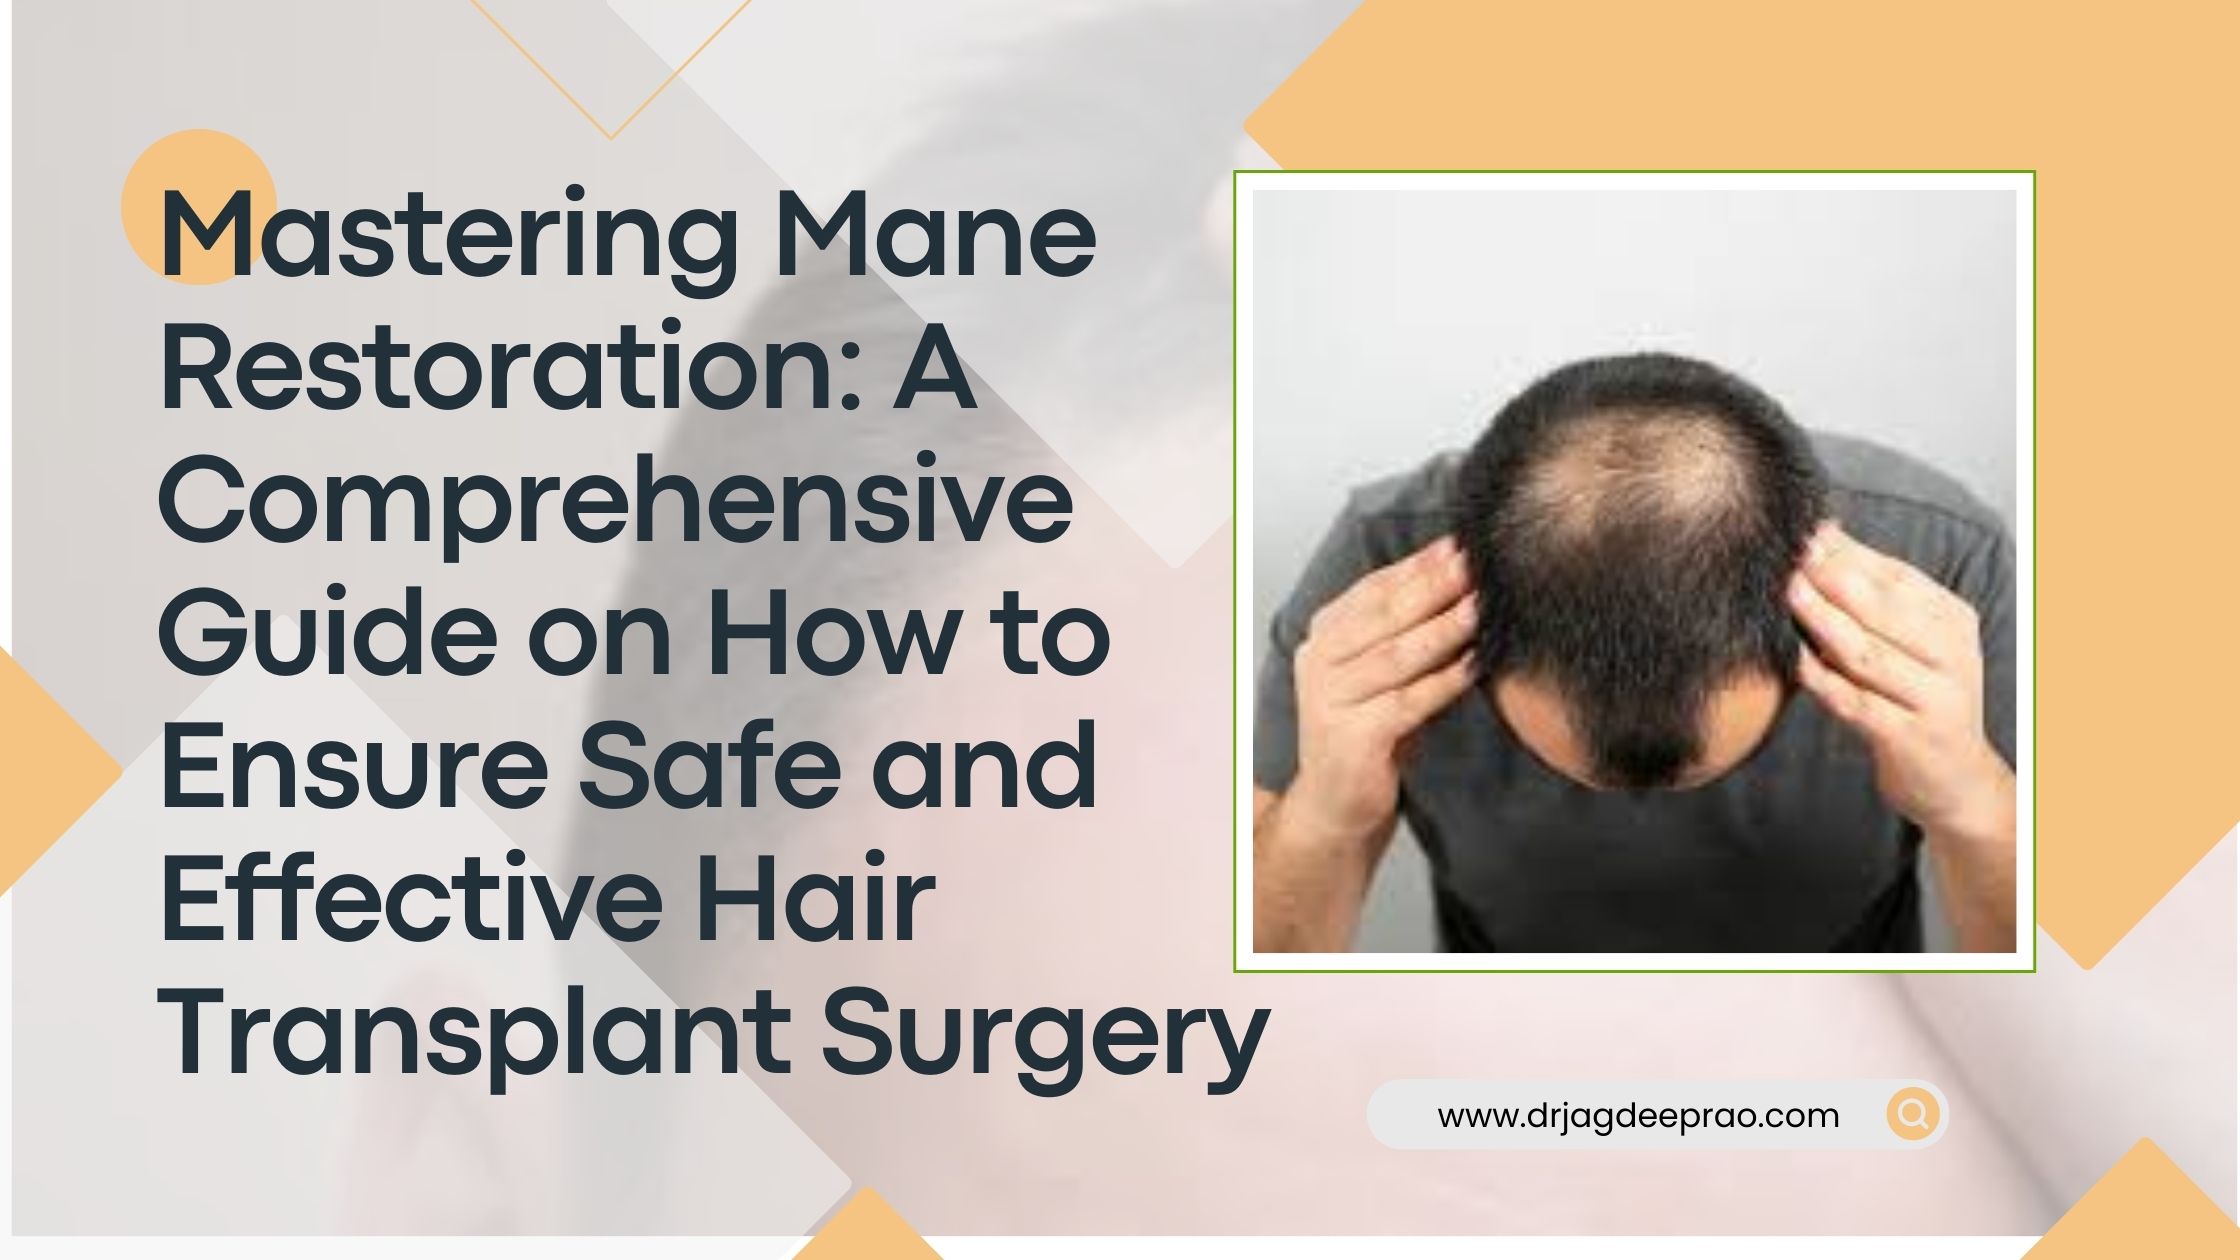 Mastering Mane Restoration A Comprehensive Guide on How to Ensure Safe and Effective Hair Transplant Surgery